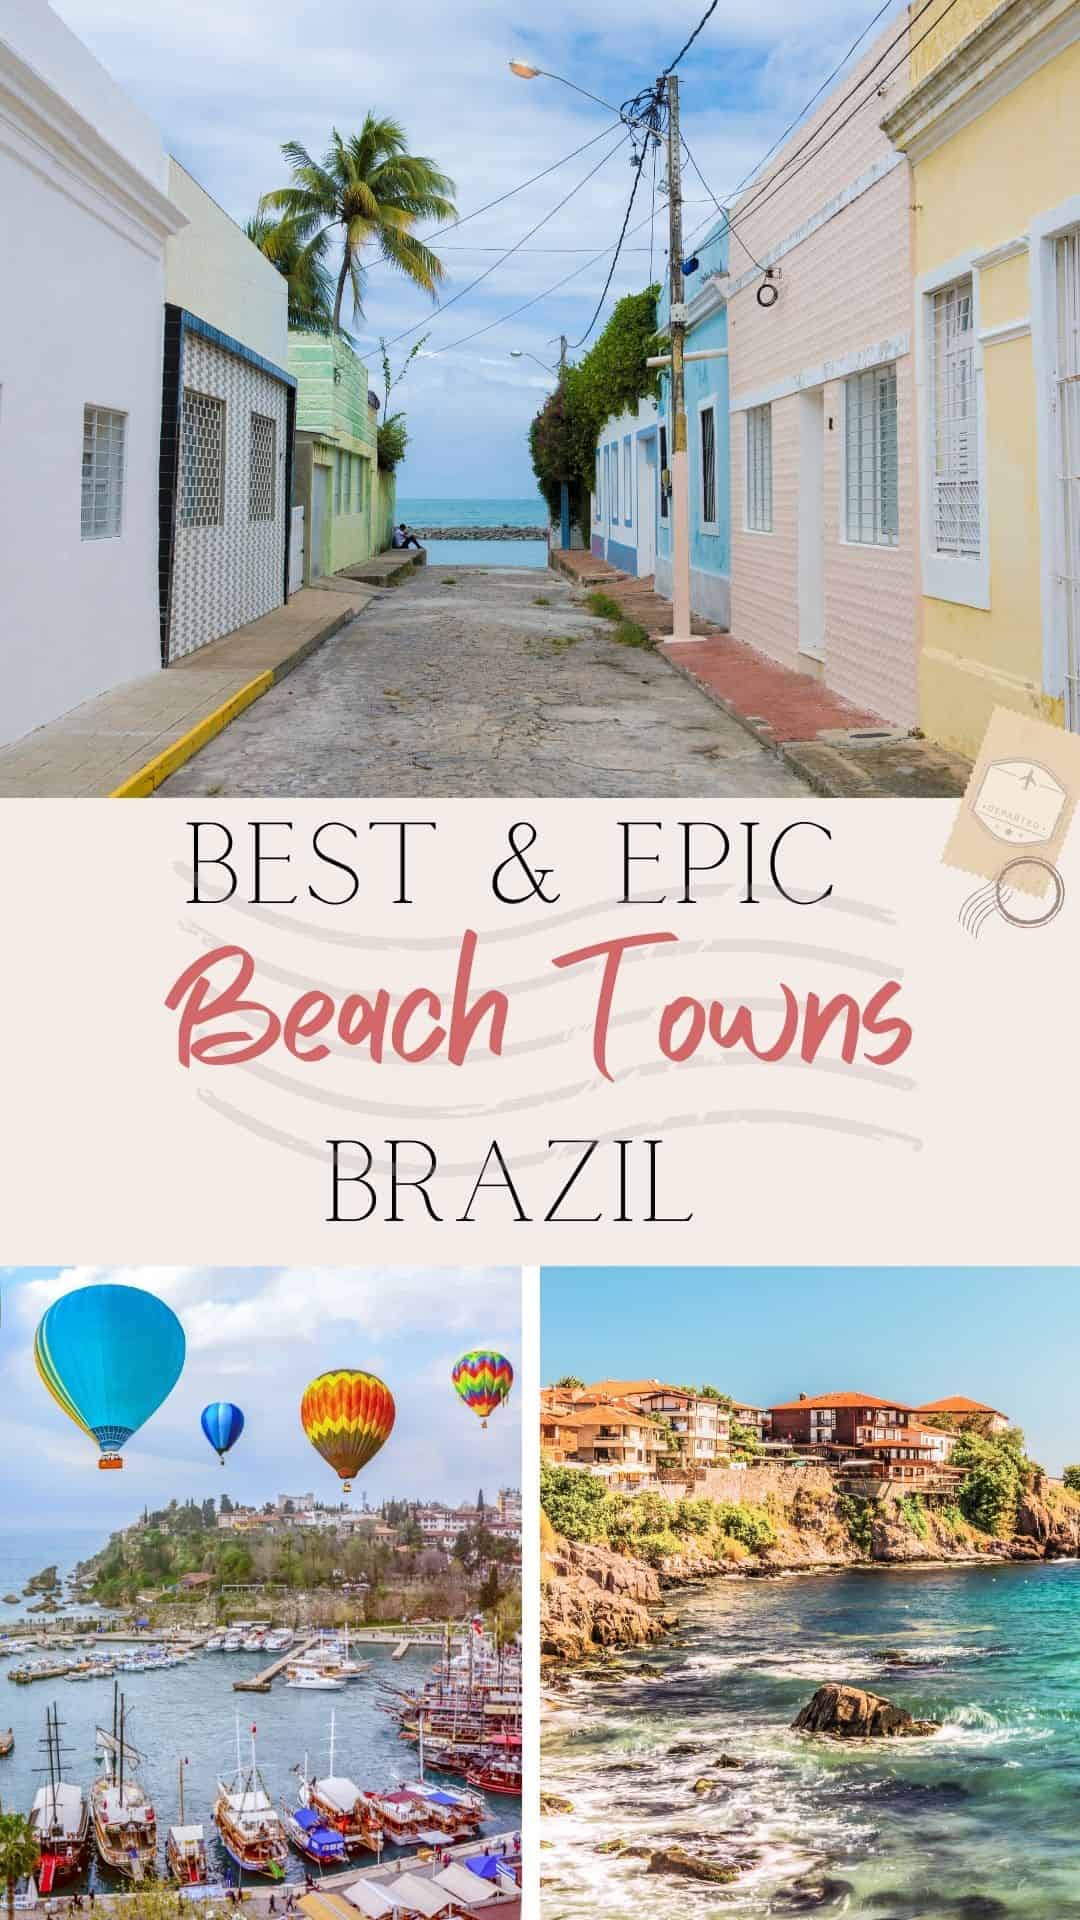 The Best Beach Towns To Travel To In Brazil